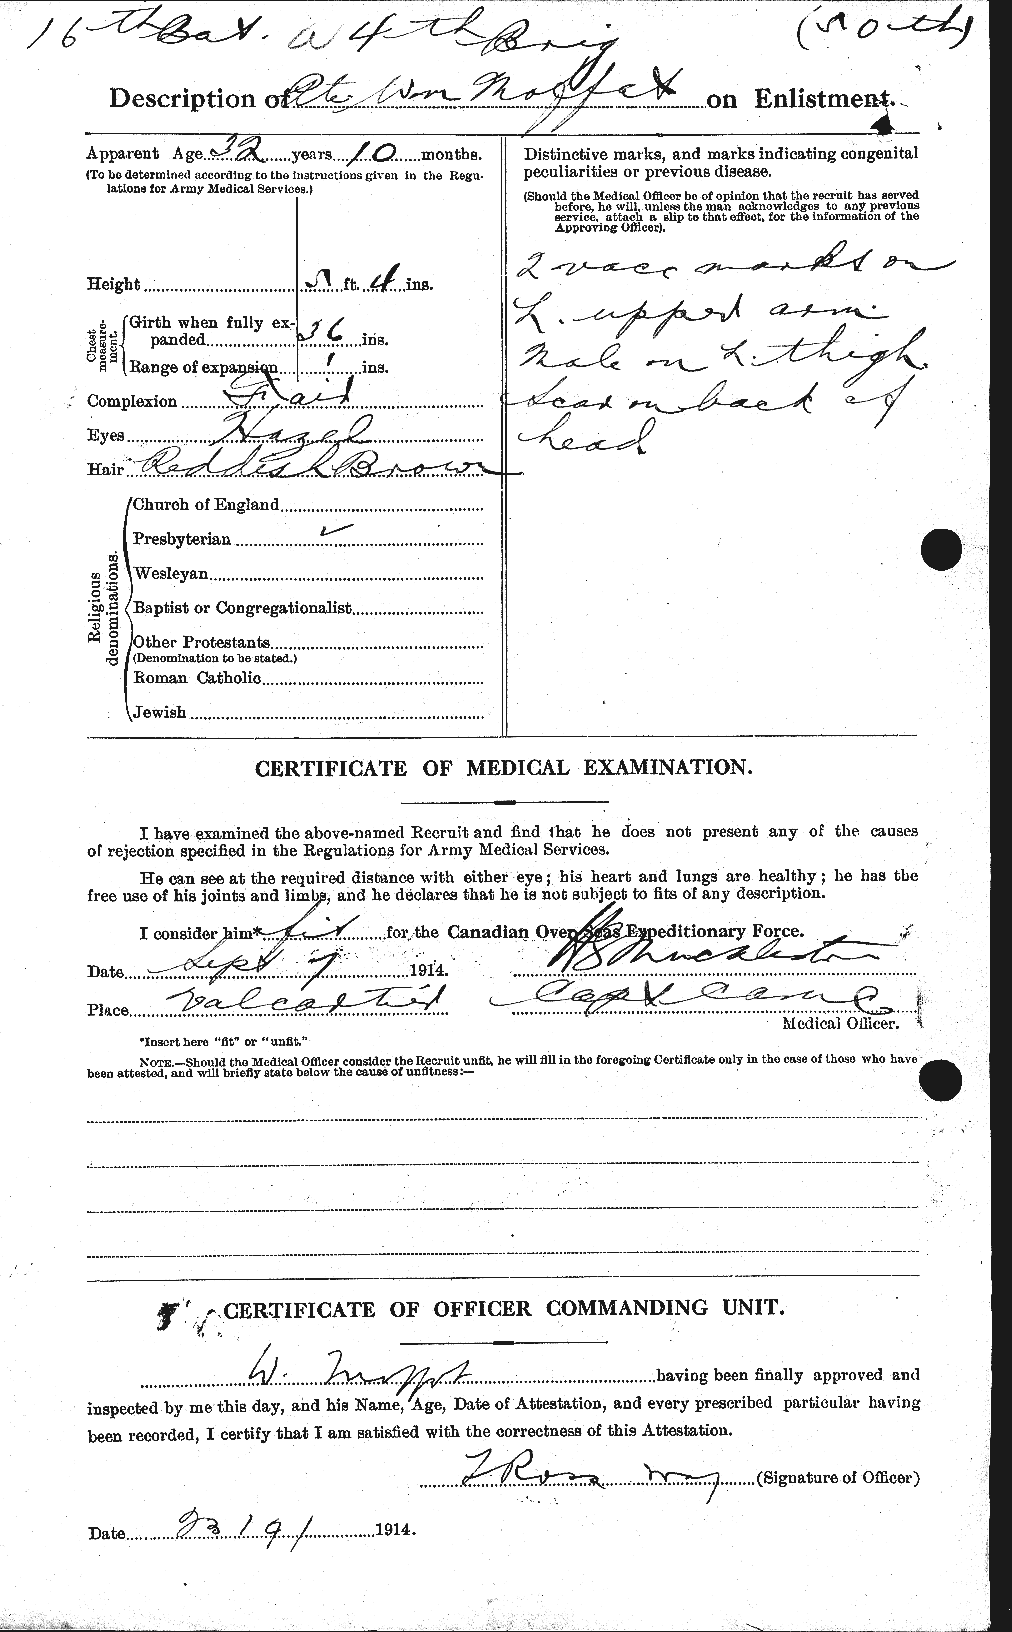 Personnel Records of the First World War - CEF 499089b